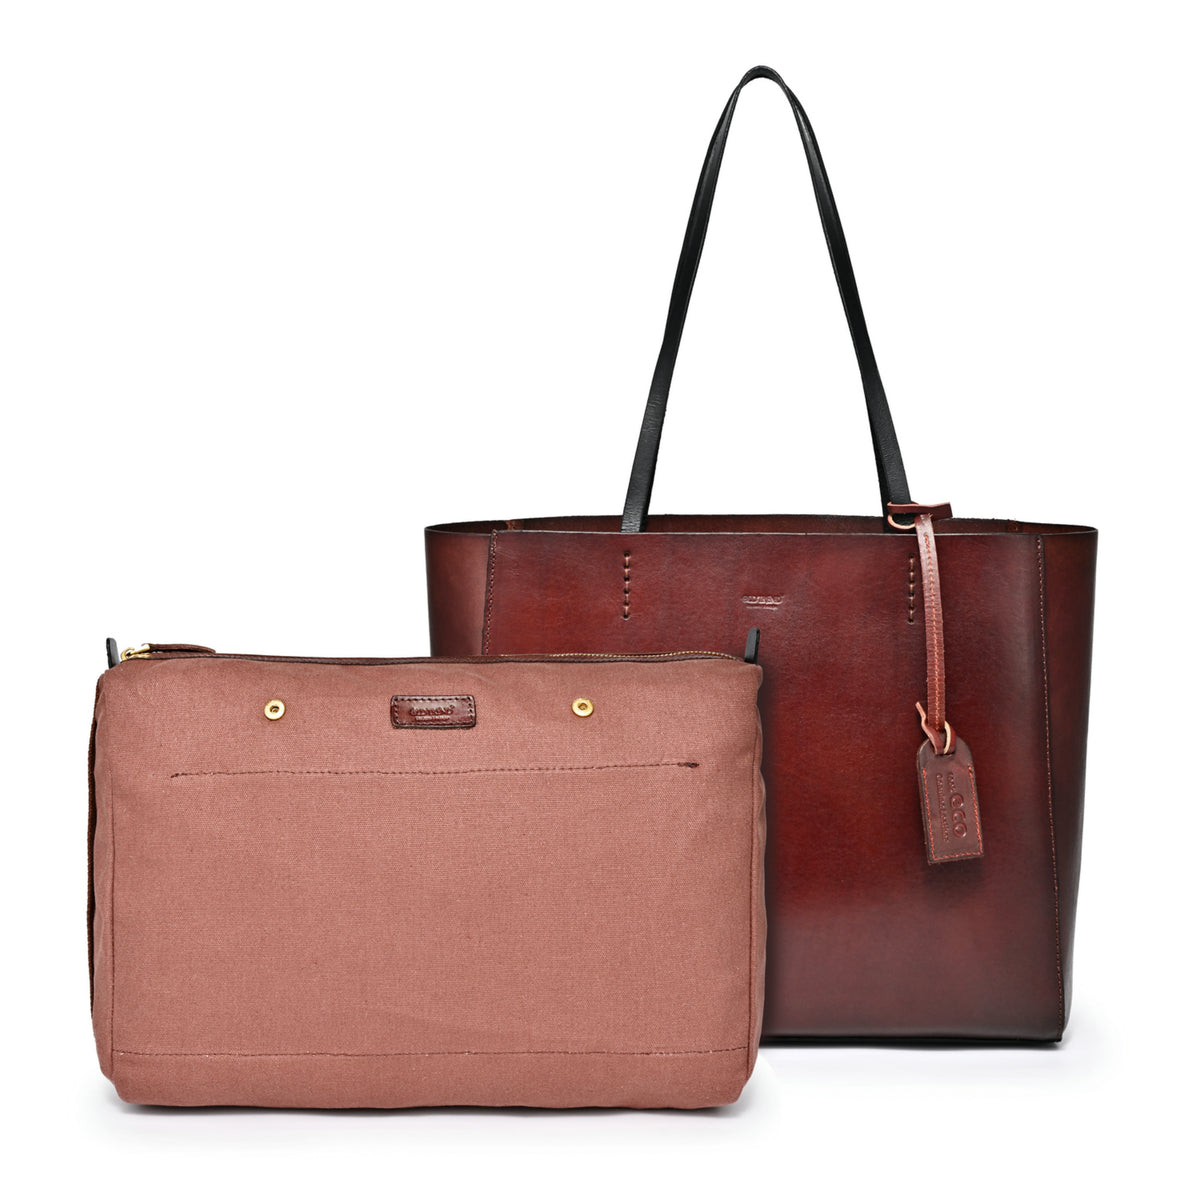 Out West Tote